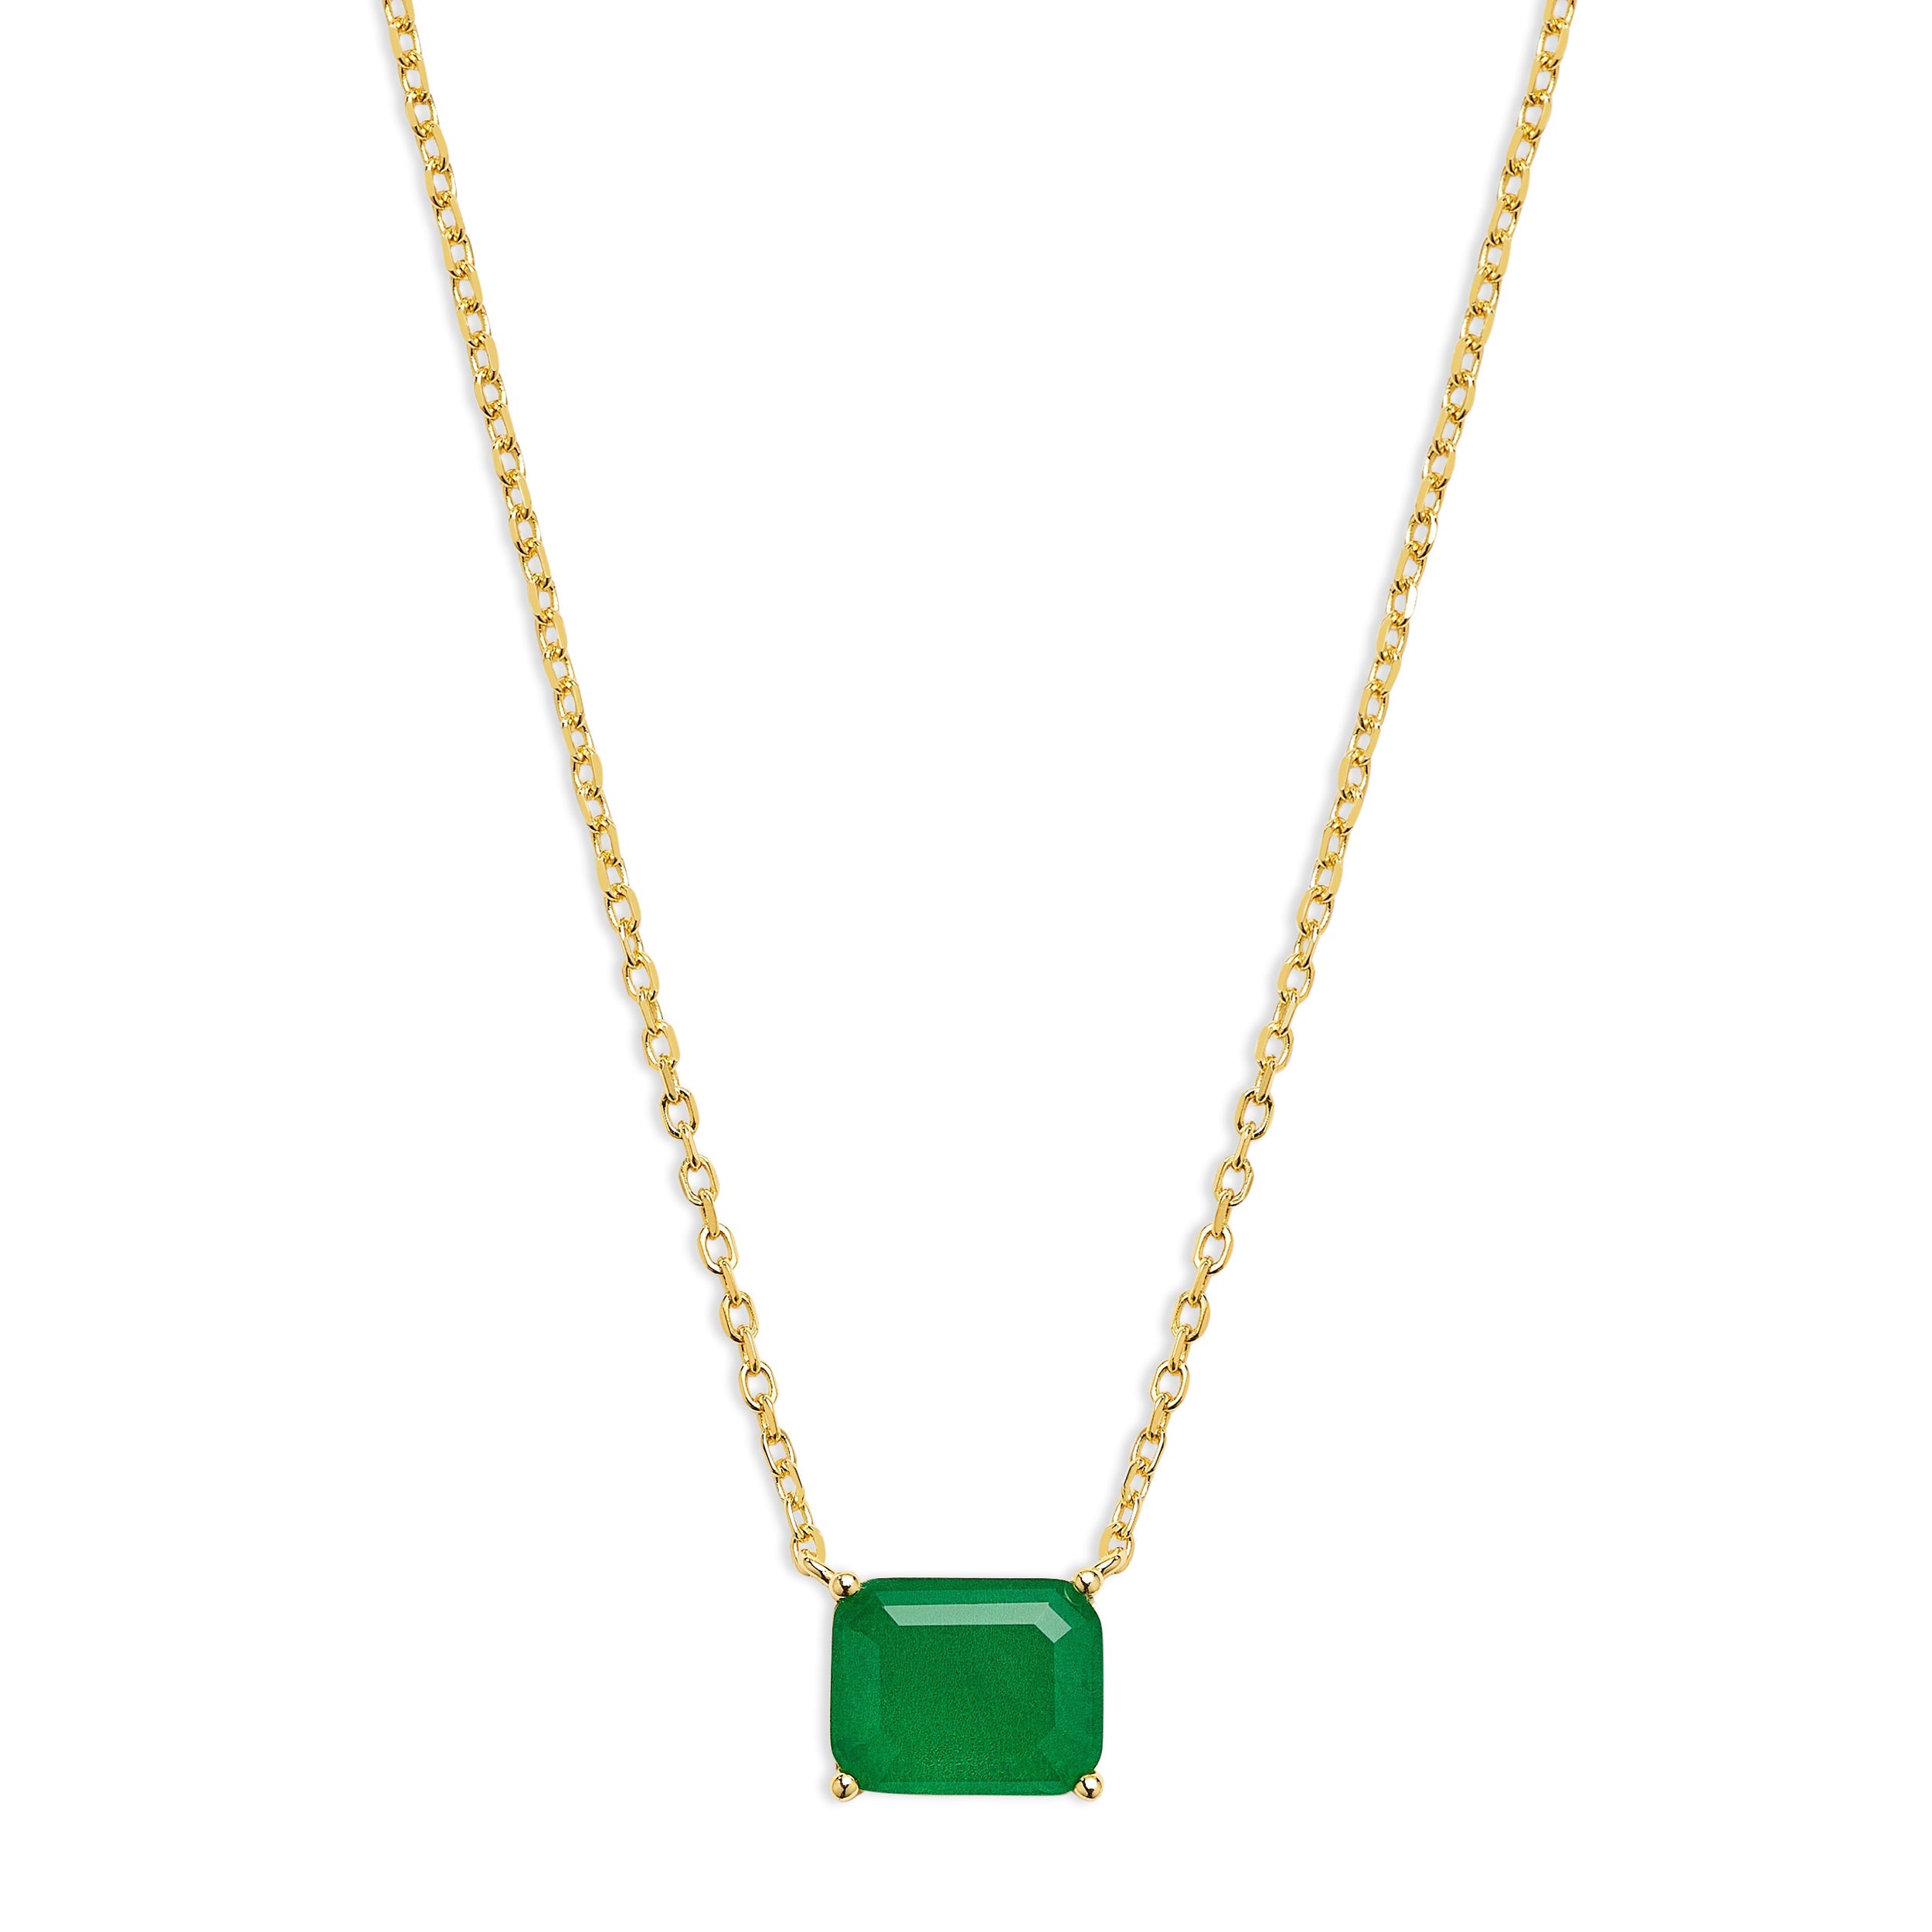 Emerald Necklace, Emerald Solitaire Necklace - The M Jewelers